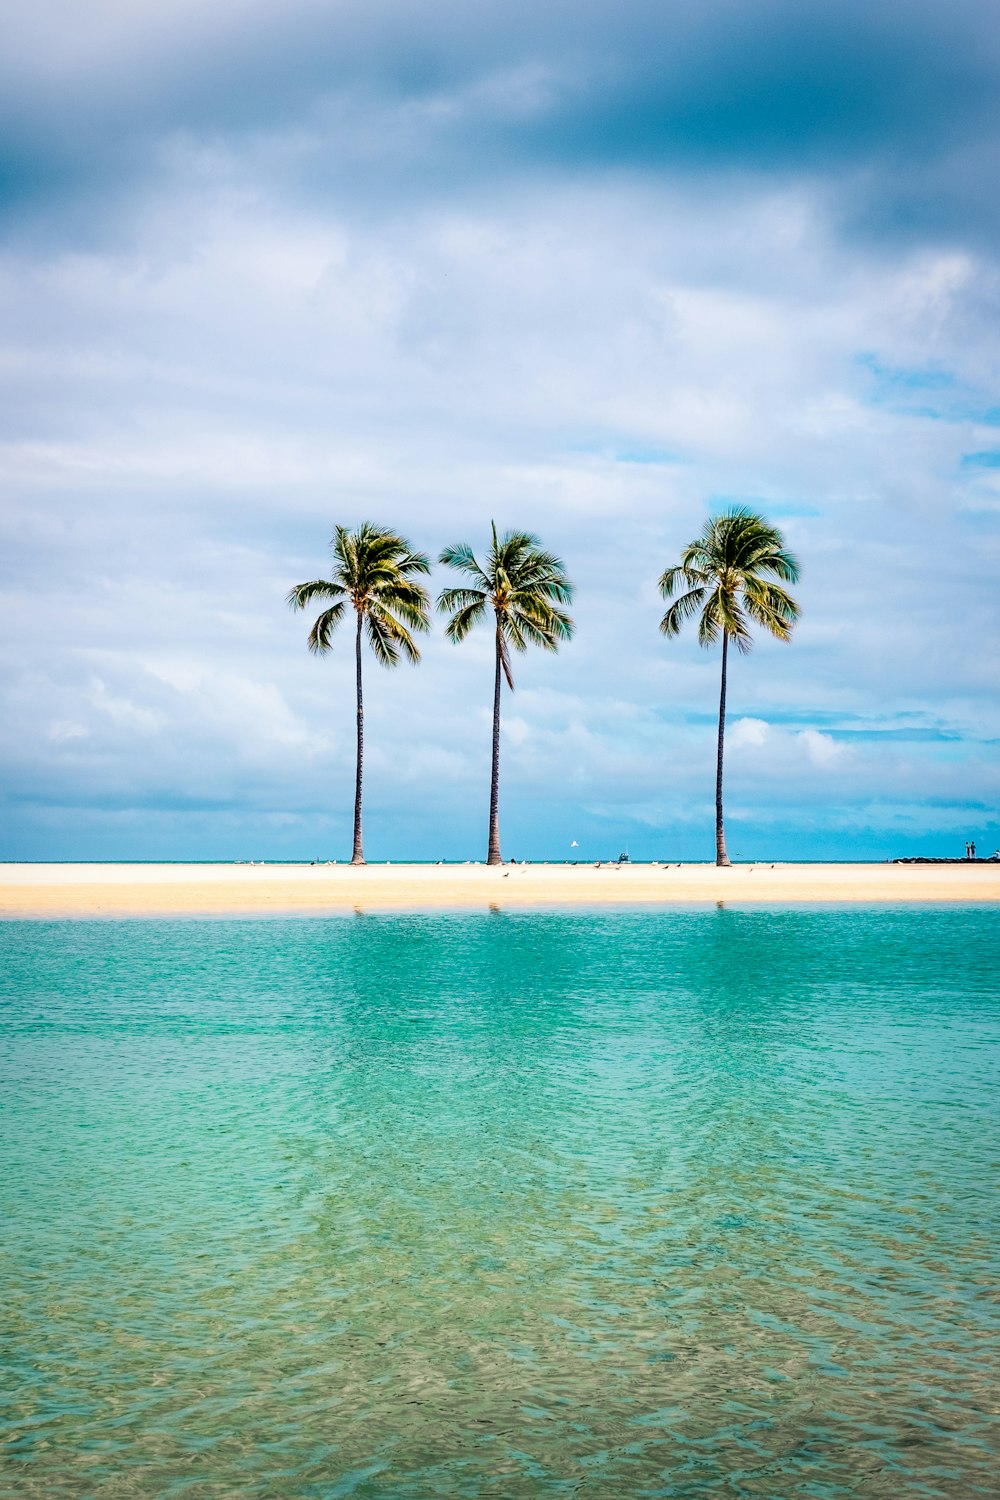 palm trees on beach shore under cloudy sky during daytime